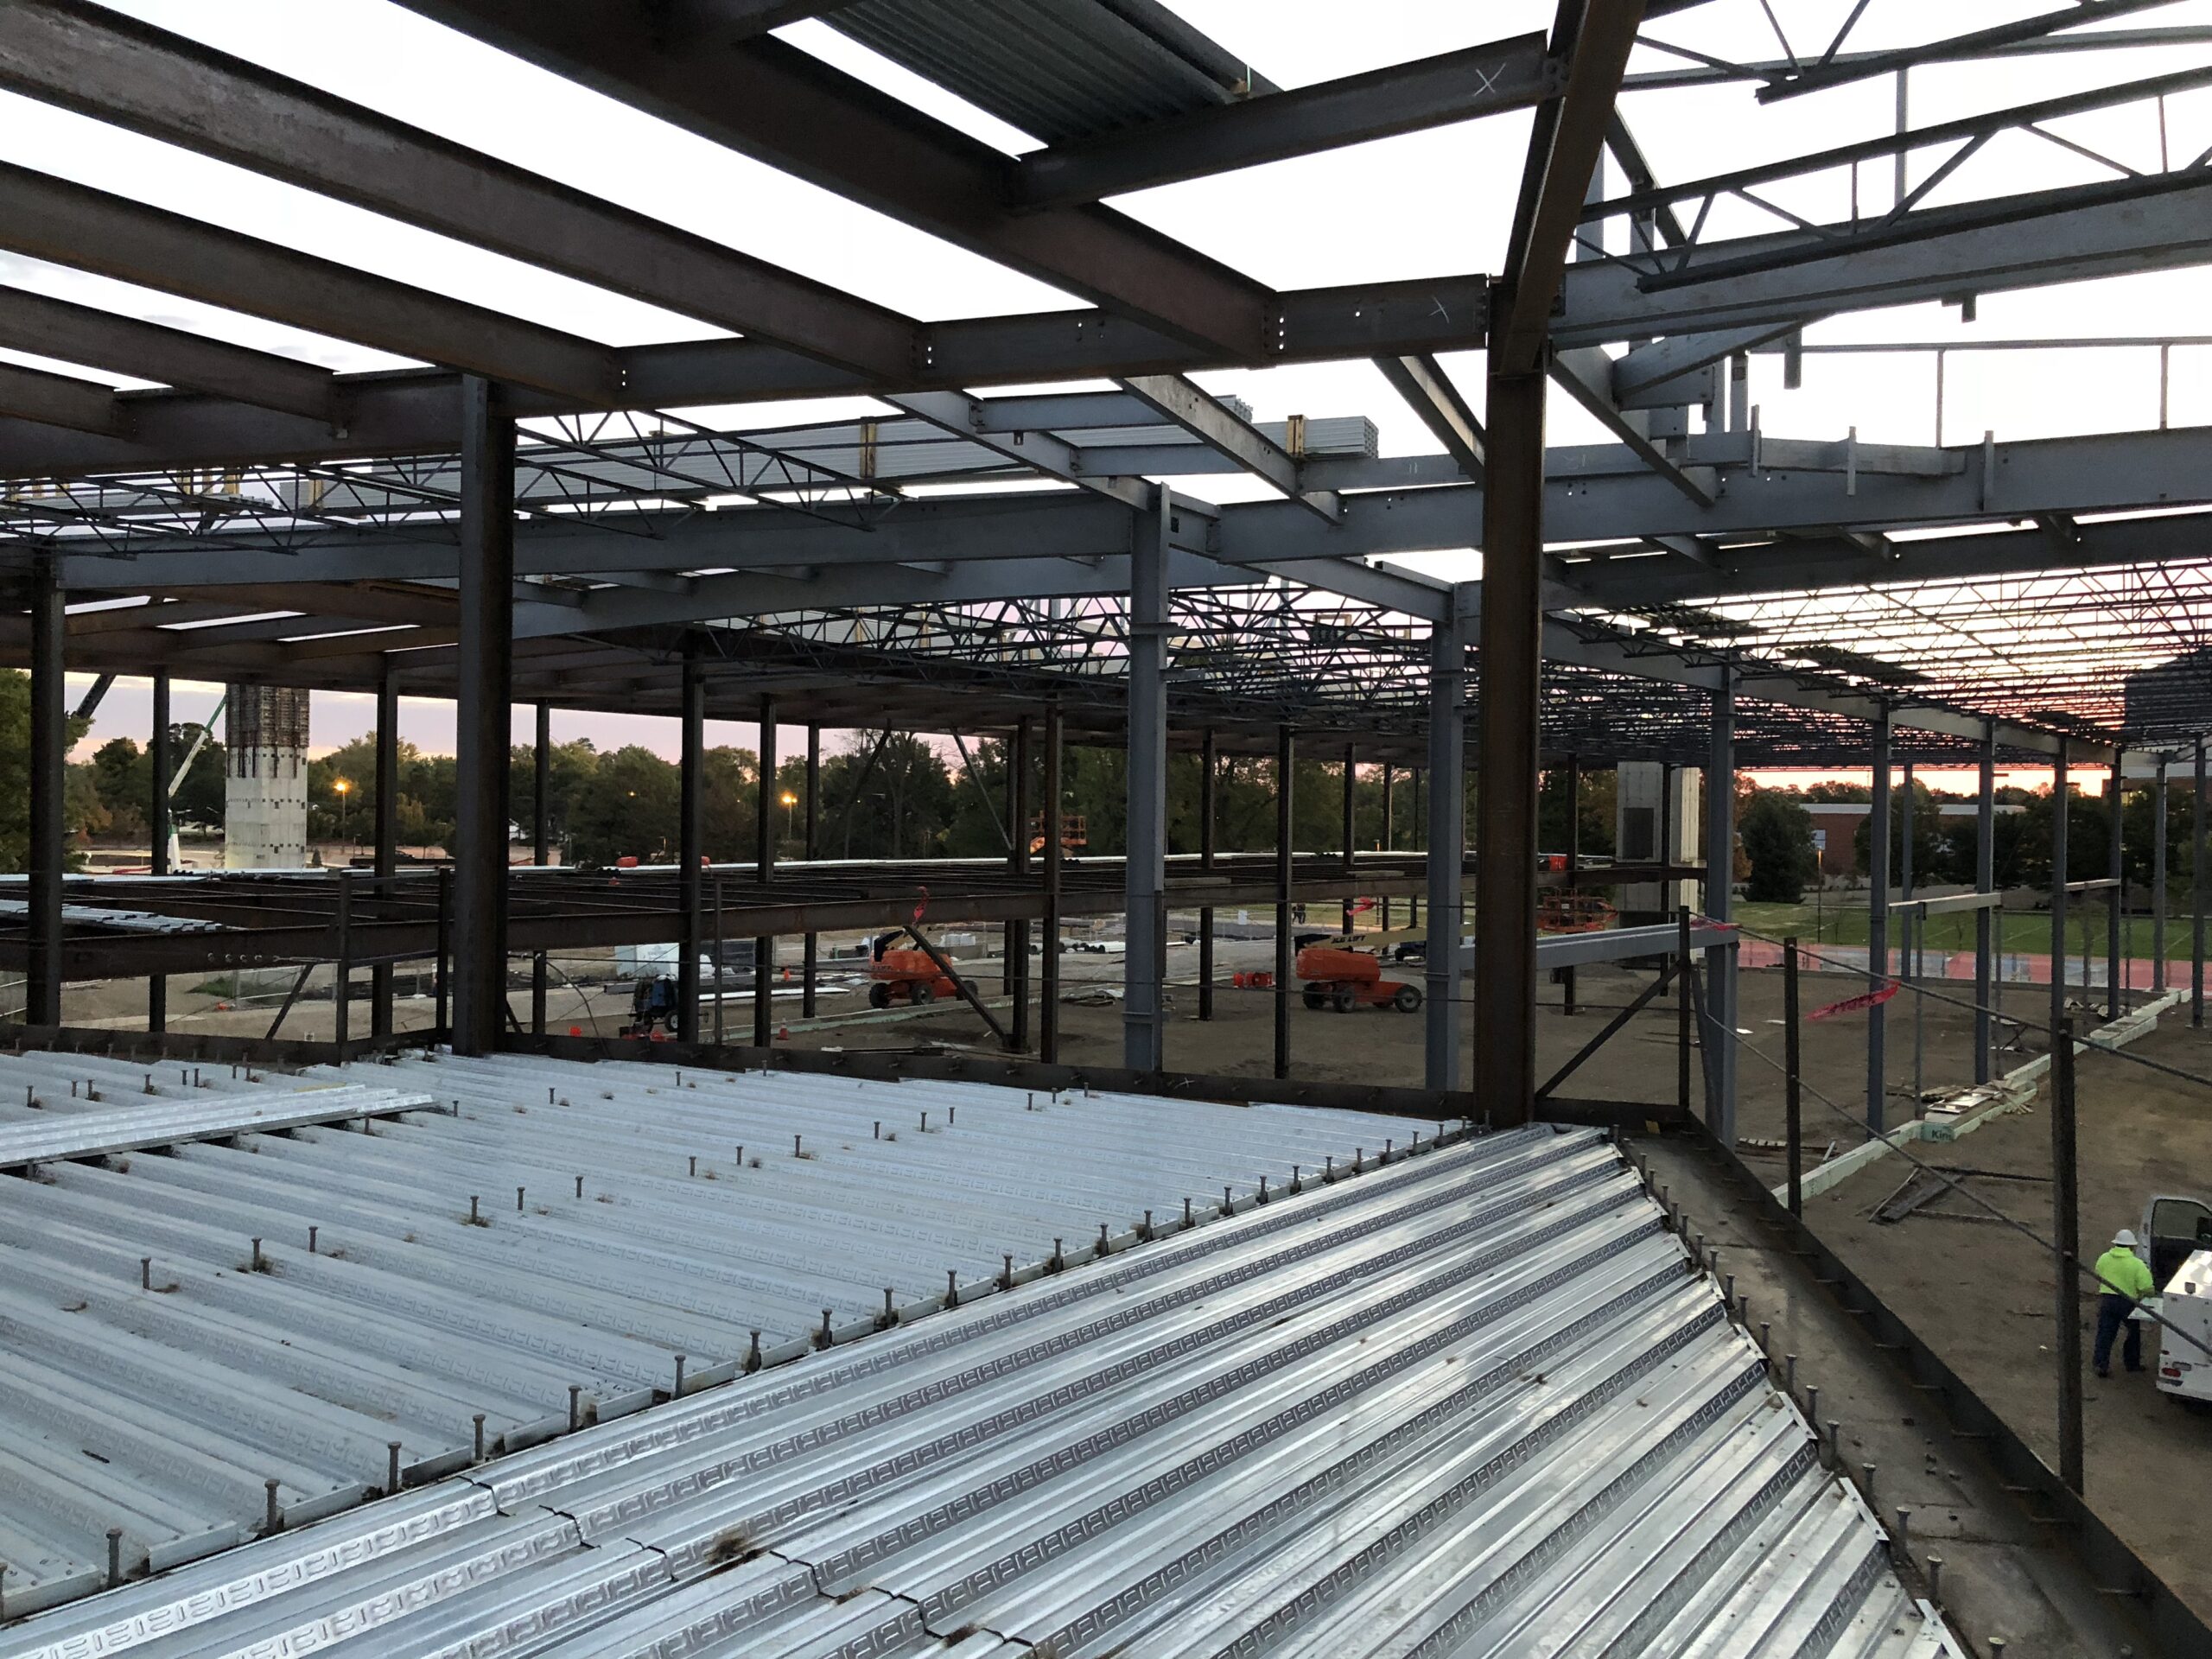 Ball State Dining Facility - In Construction